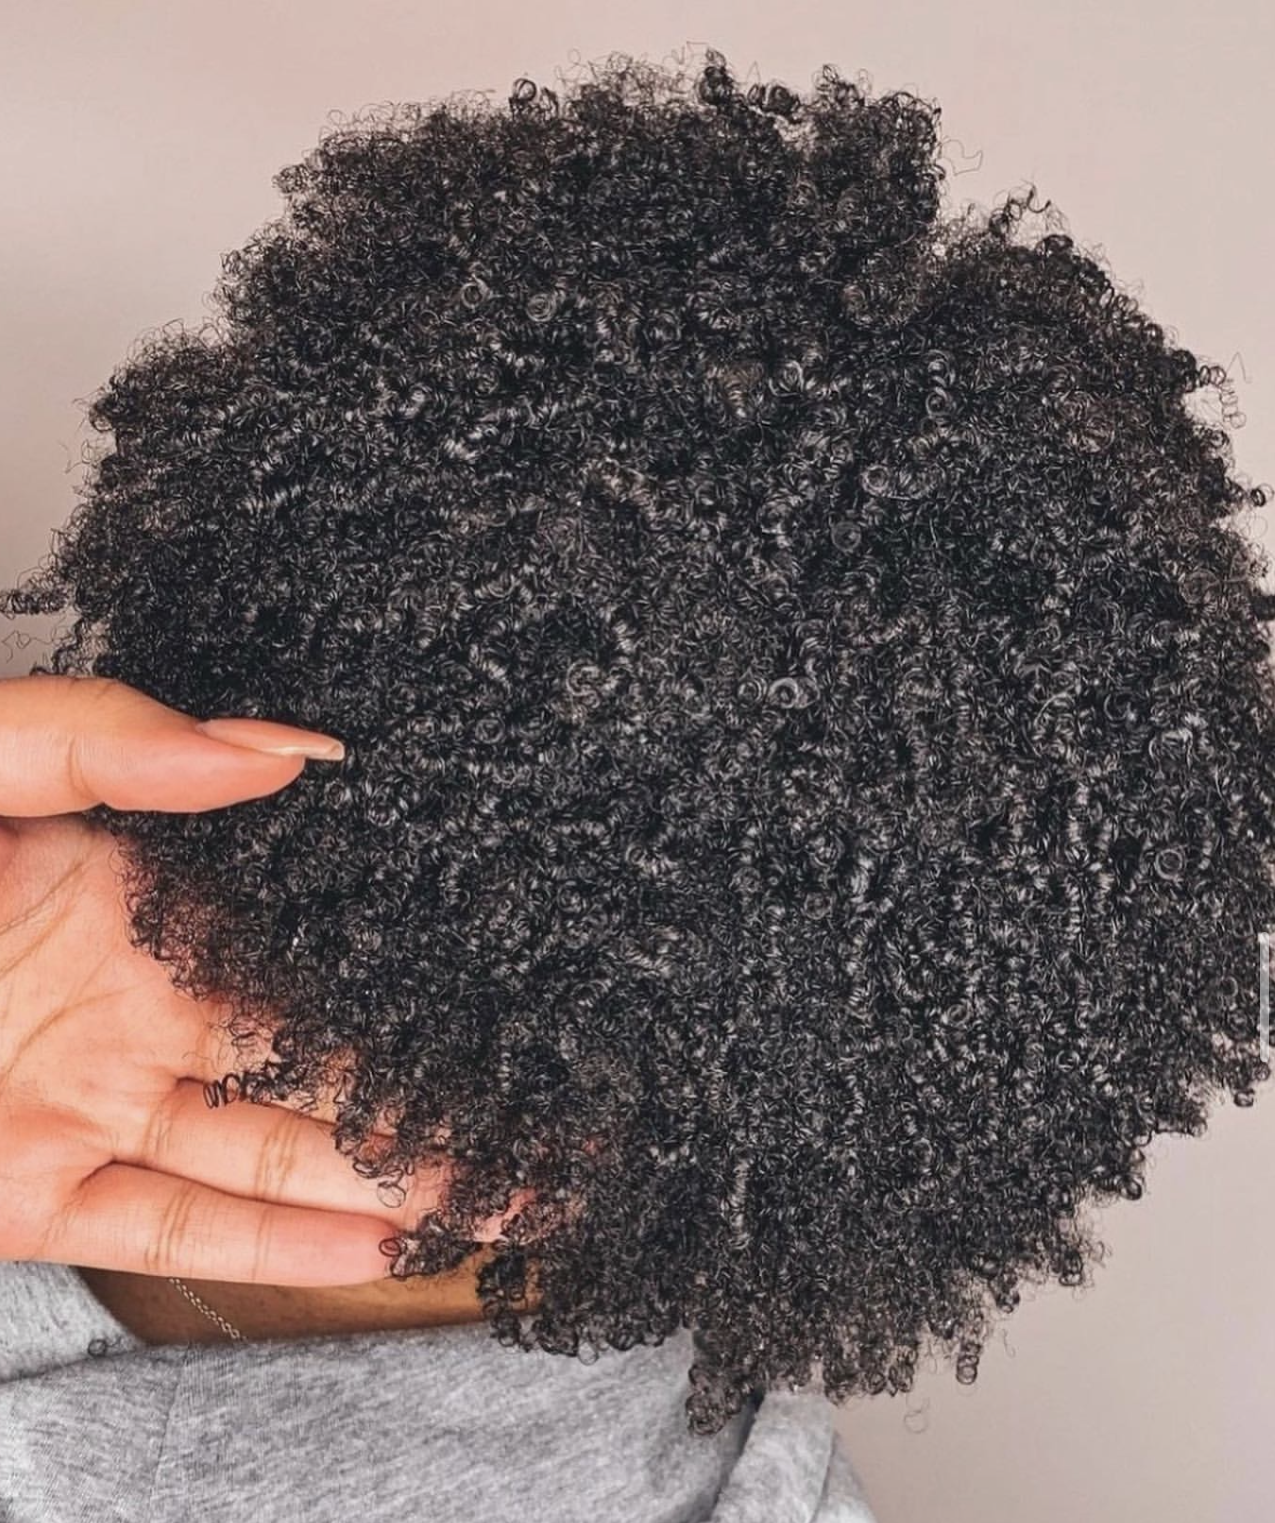 6 Moisture Retention Tips for Textured Hair this Winter